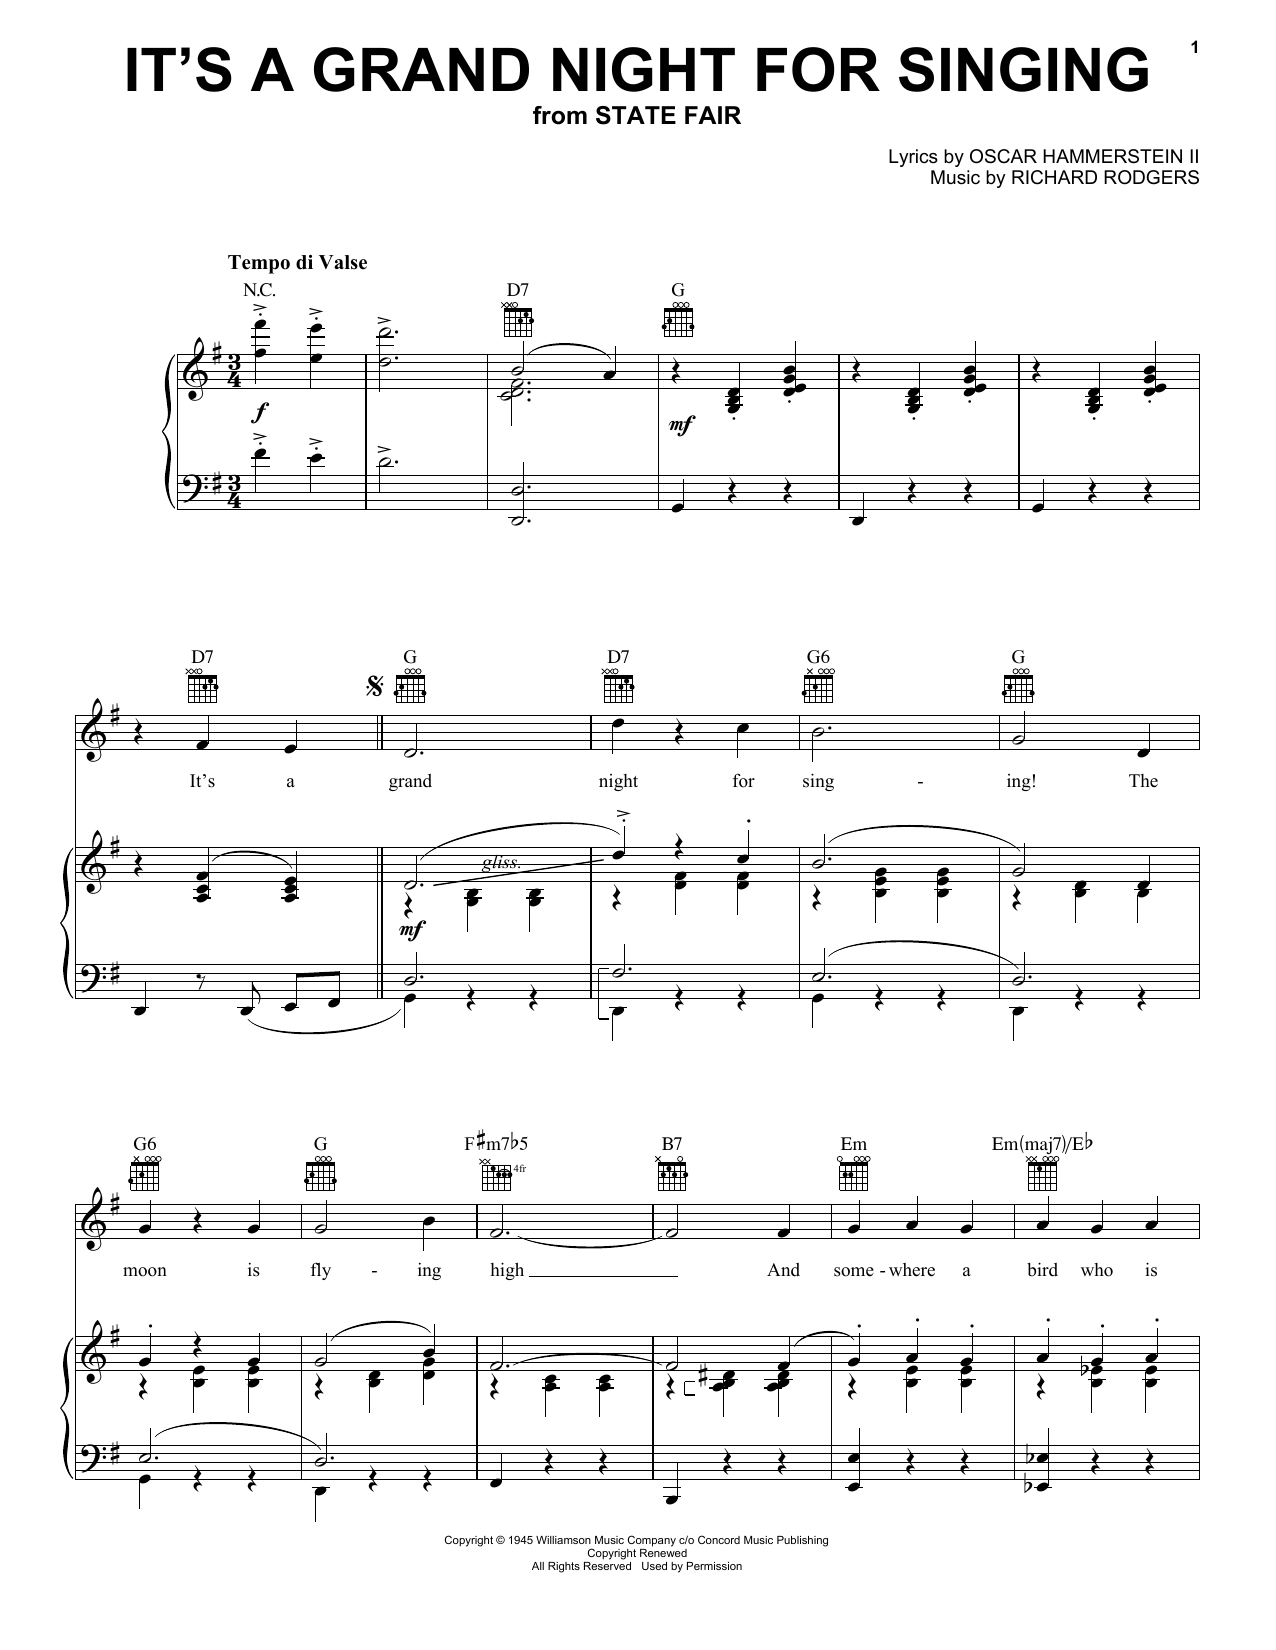 Rodgers & Hammerstein It's A Grand Night For Singing sheet music notes and chords. Download Printable PDF.